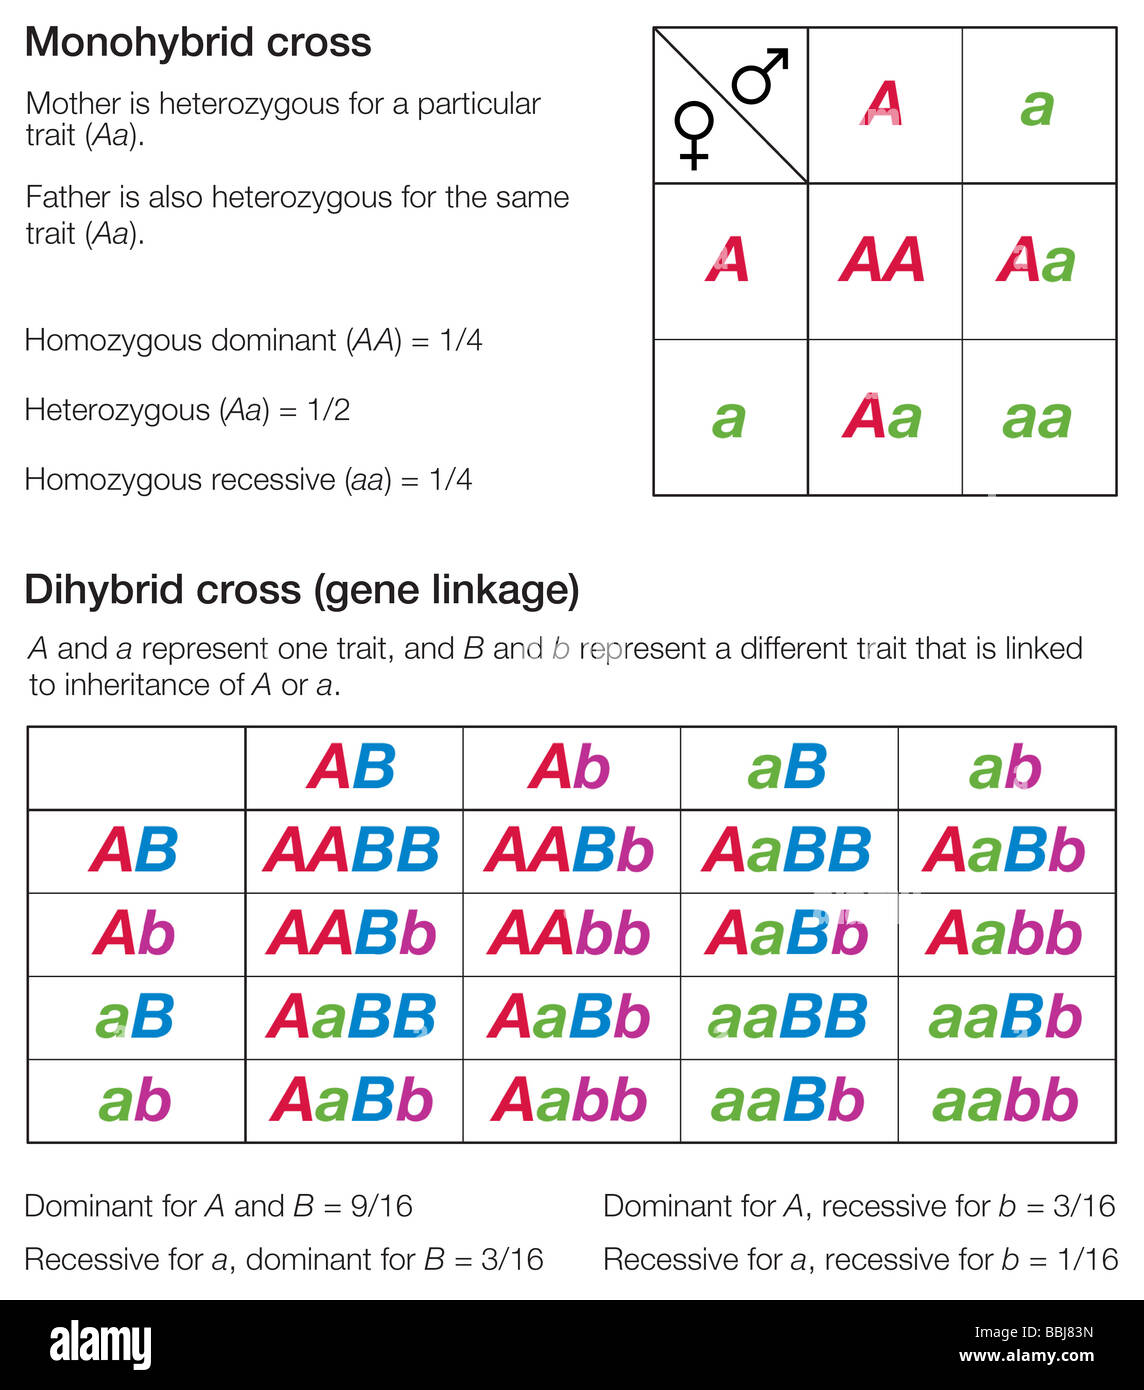 Punnett squares of a monohybrid and a dihybrid cross, used to represent inheritance patterns. Stock Photo